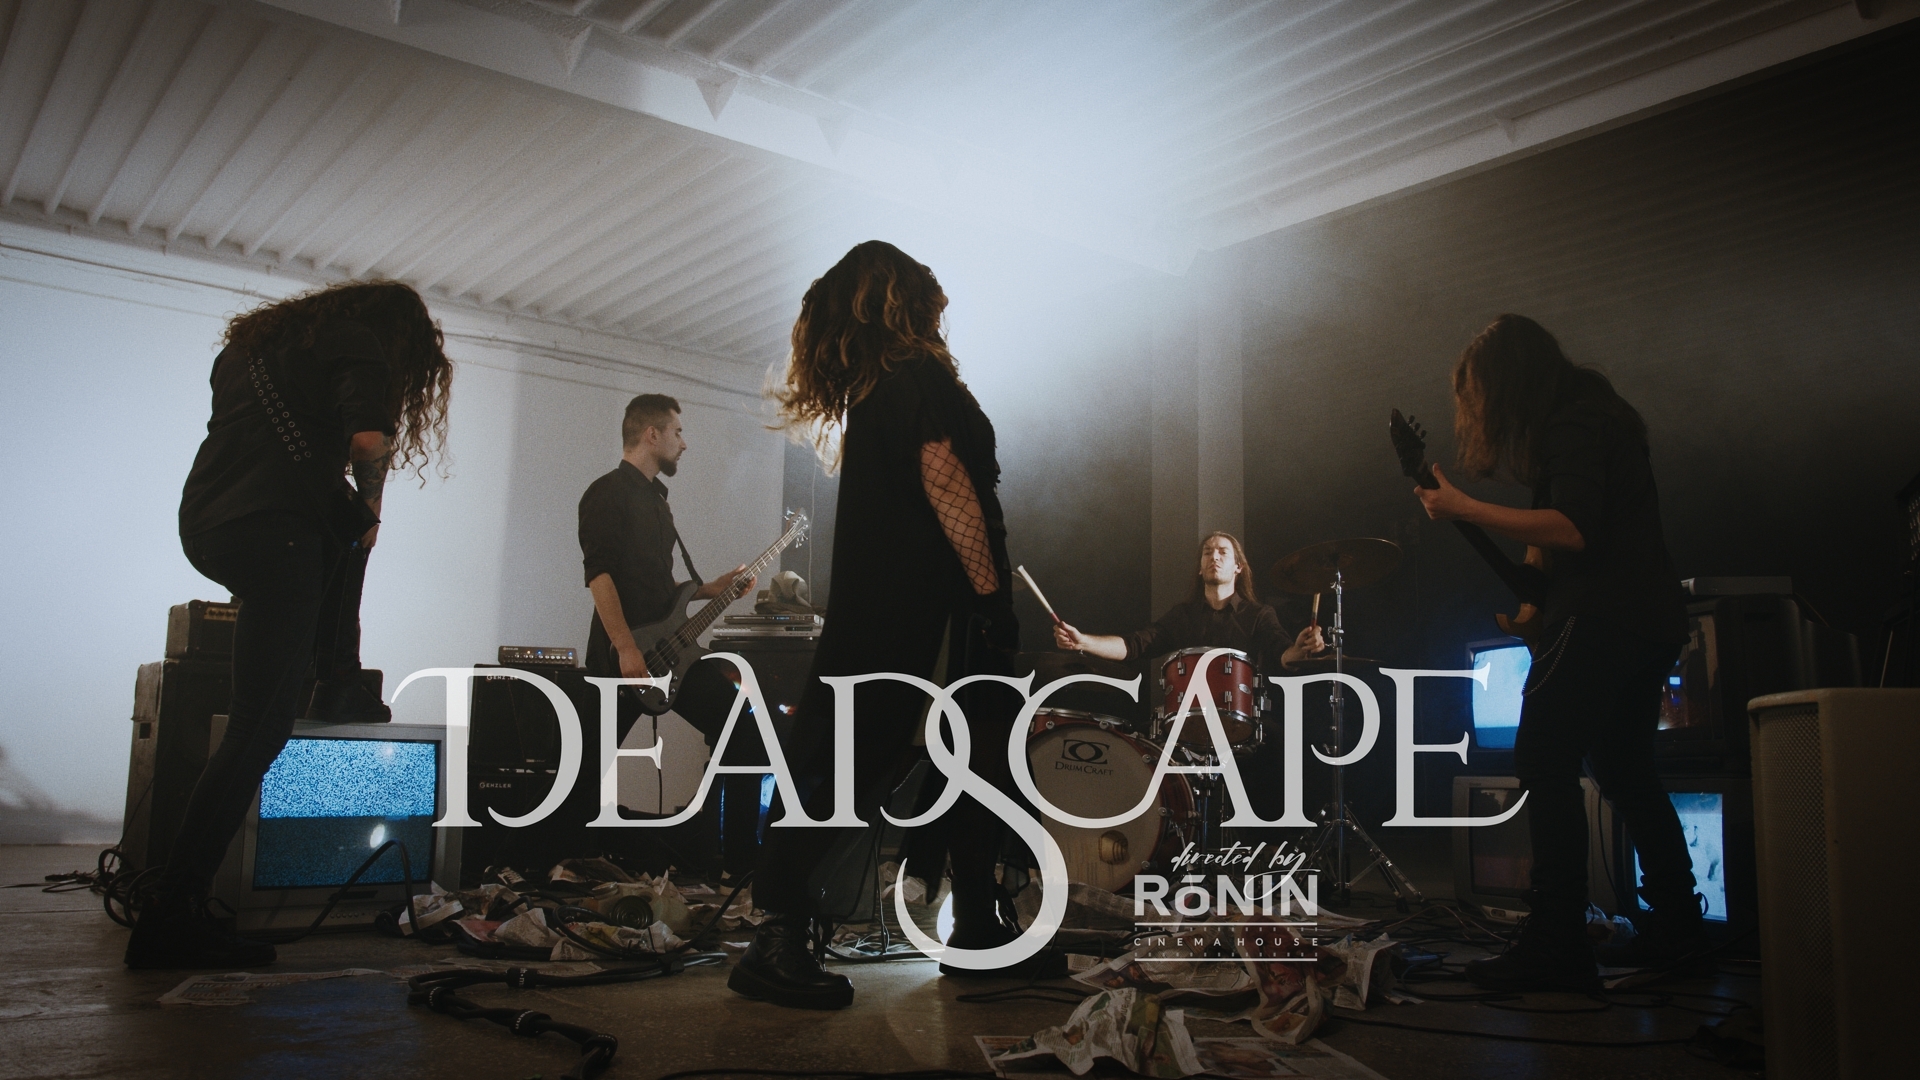 DEADSCAPE – new video out